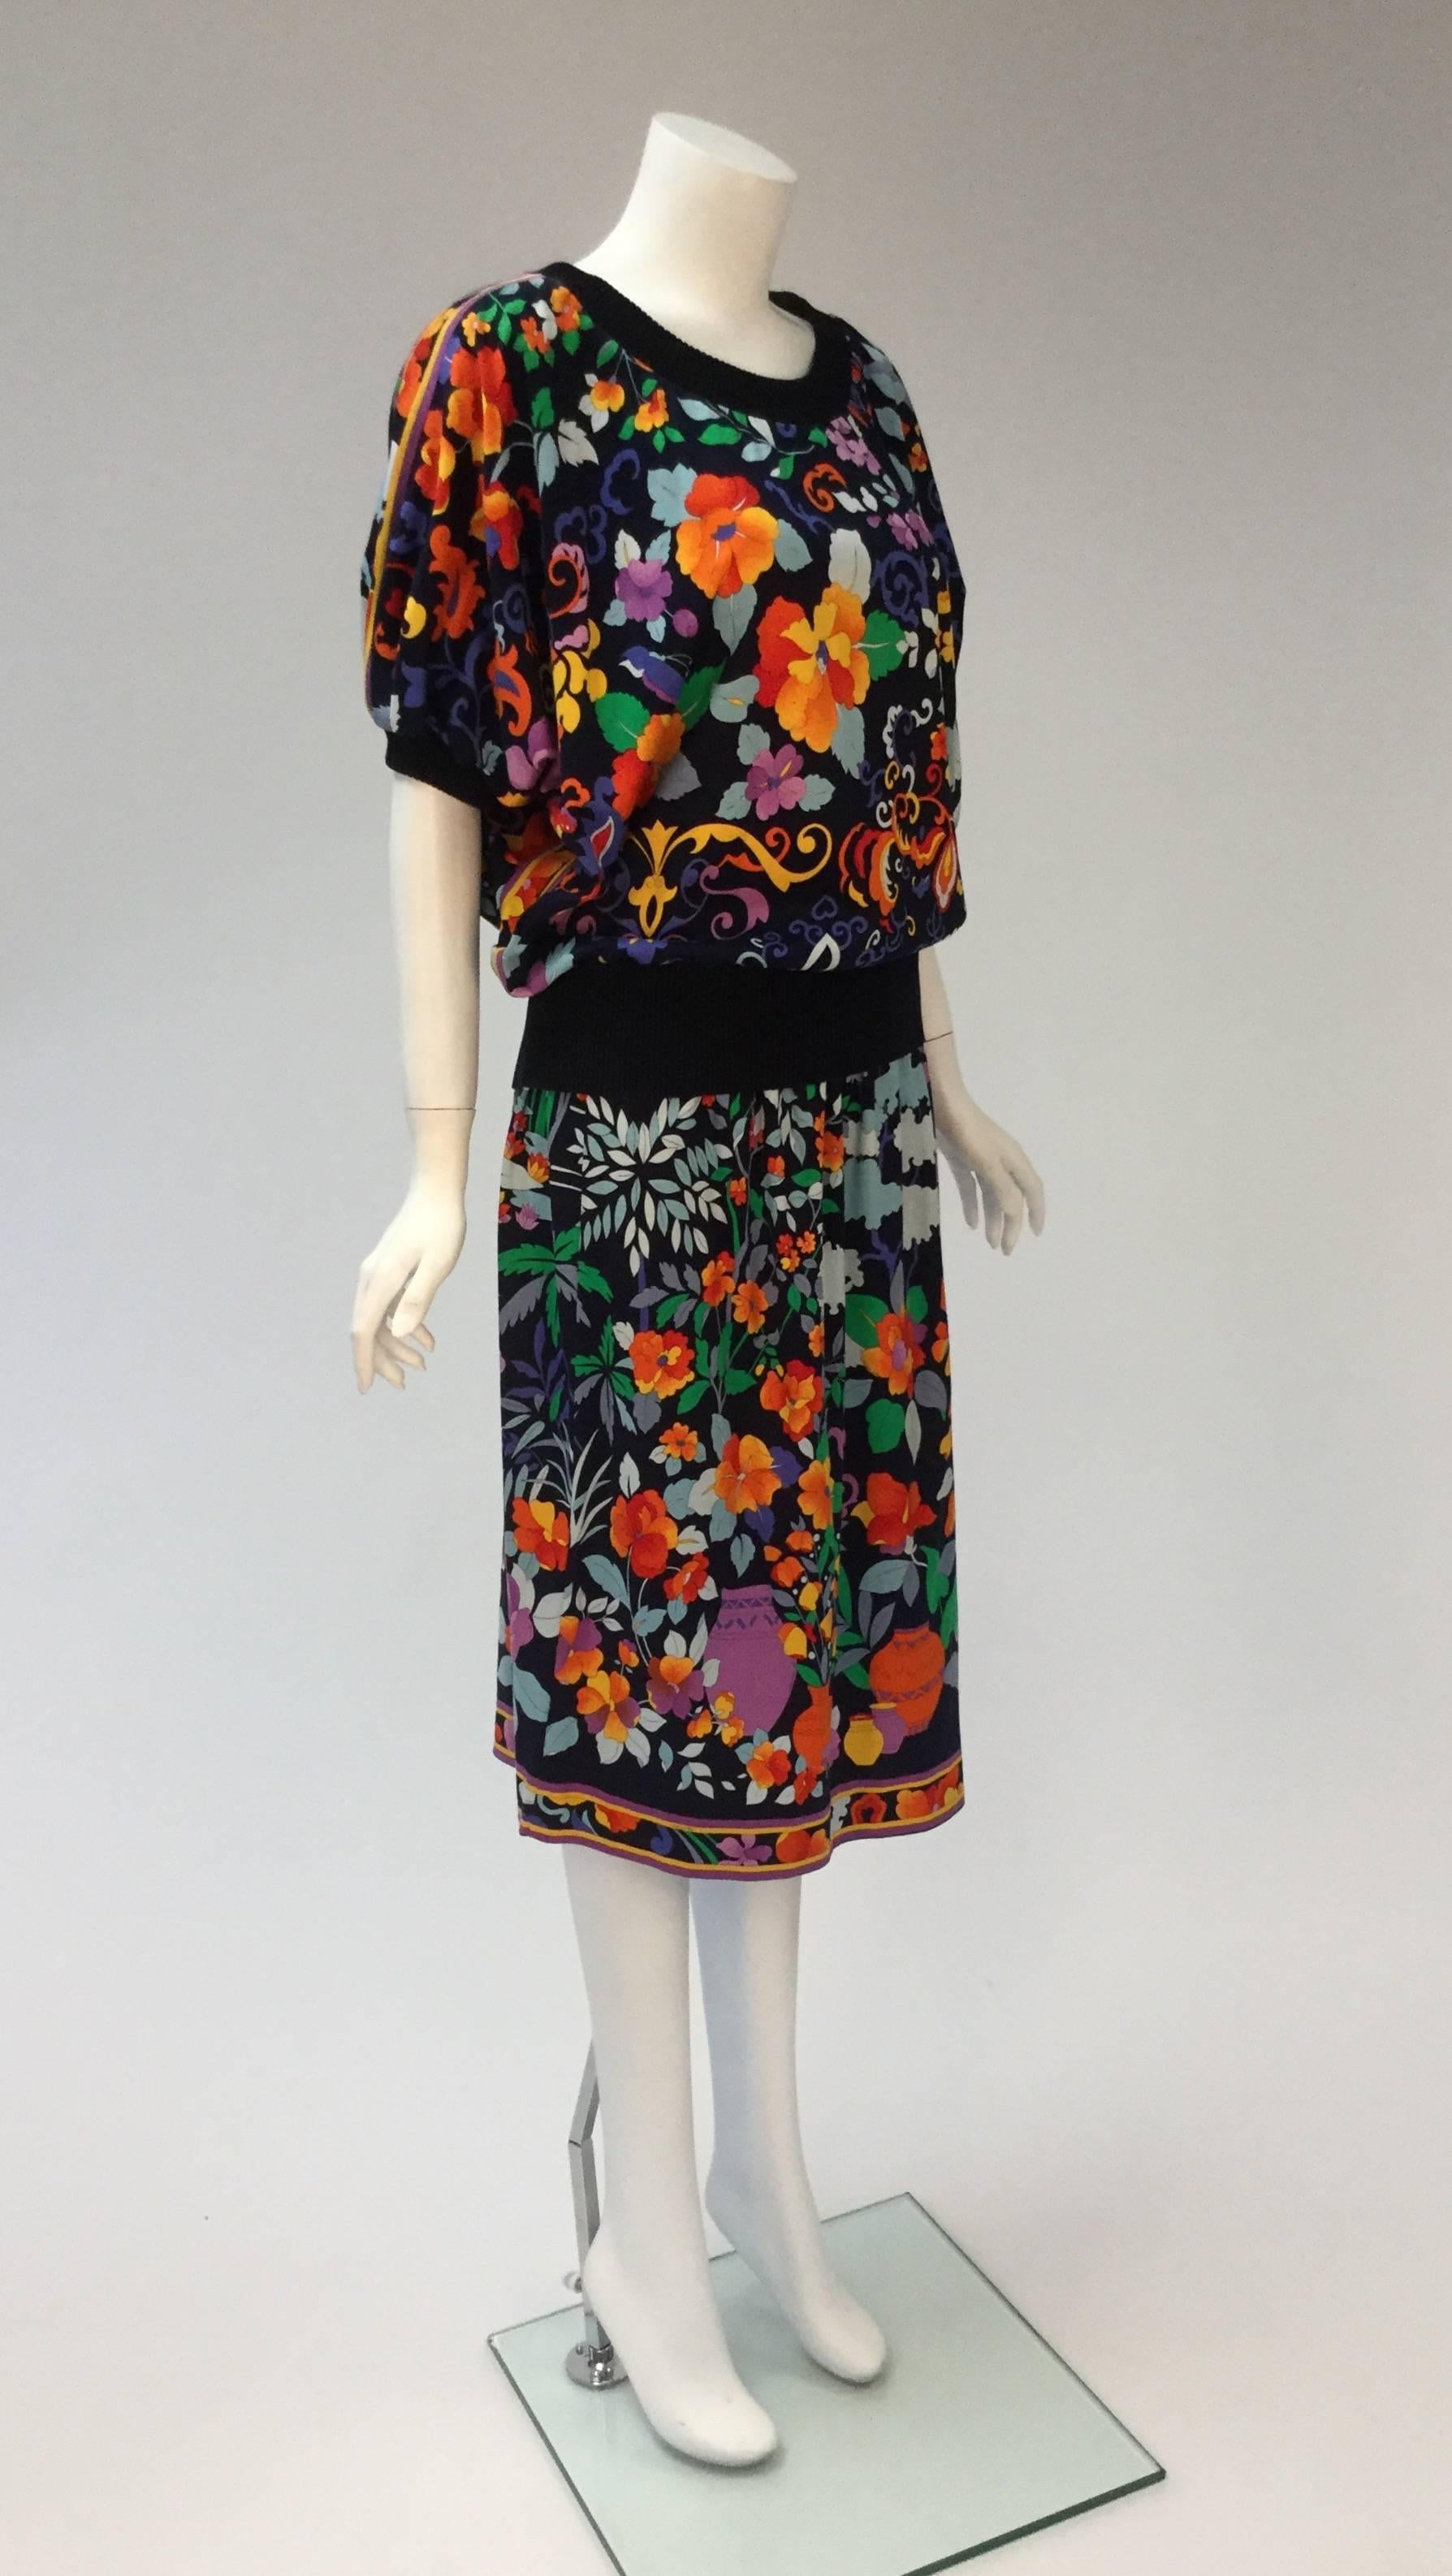 Fun and and uber comfortable ensemble from Leonard that can be worn year round. In addition, this one is easy to dress up or down and travels quite nicely.

The classic Leonard floral print is used both in the pima cotton skirt and its top. Neck,